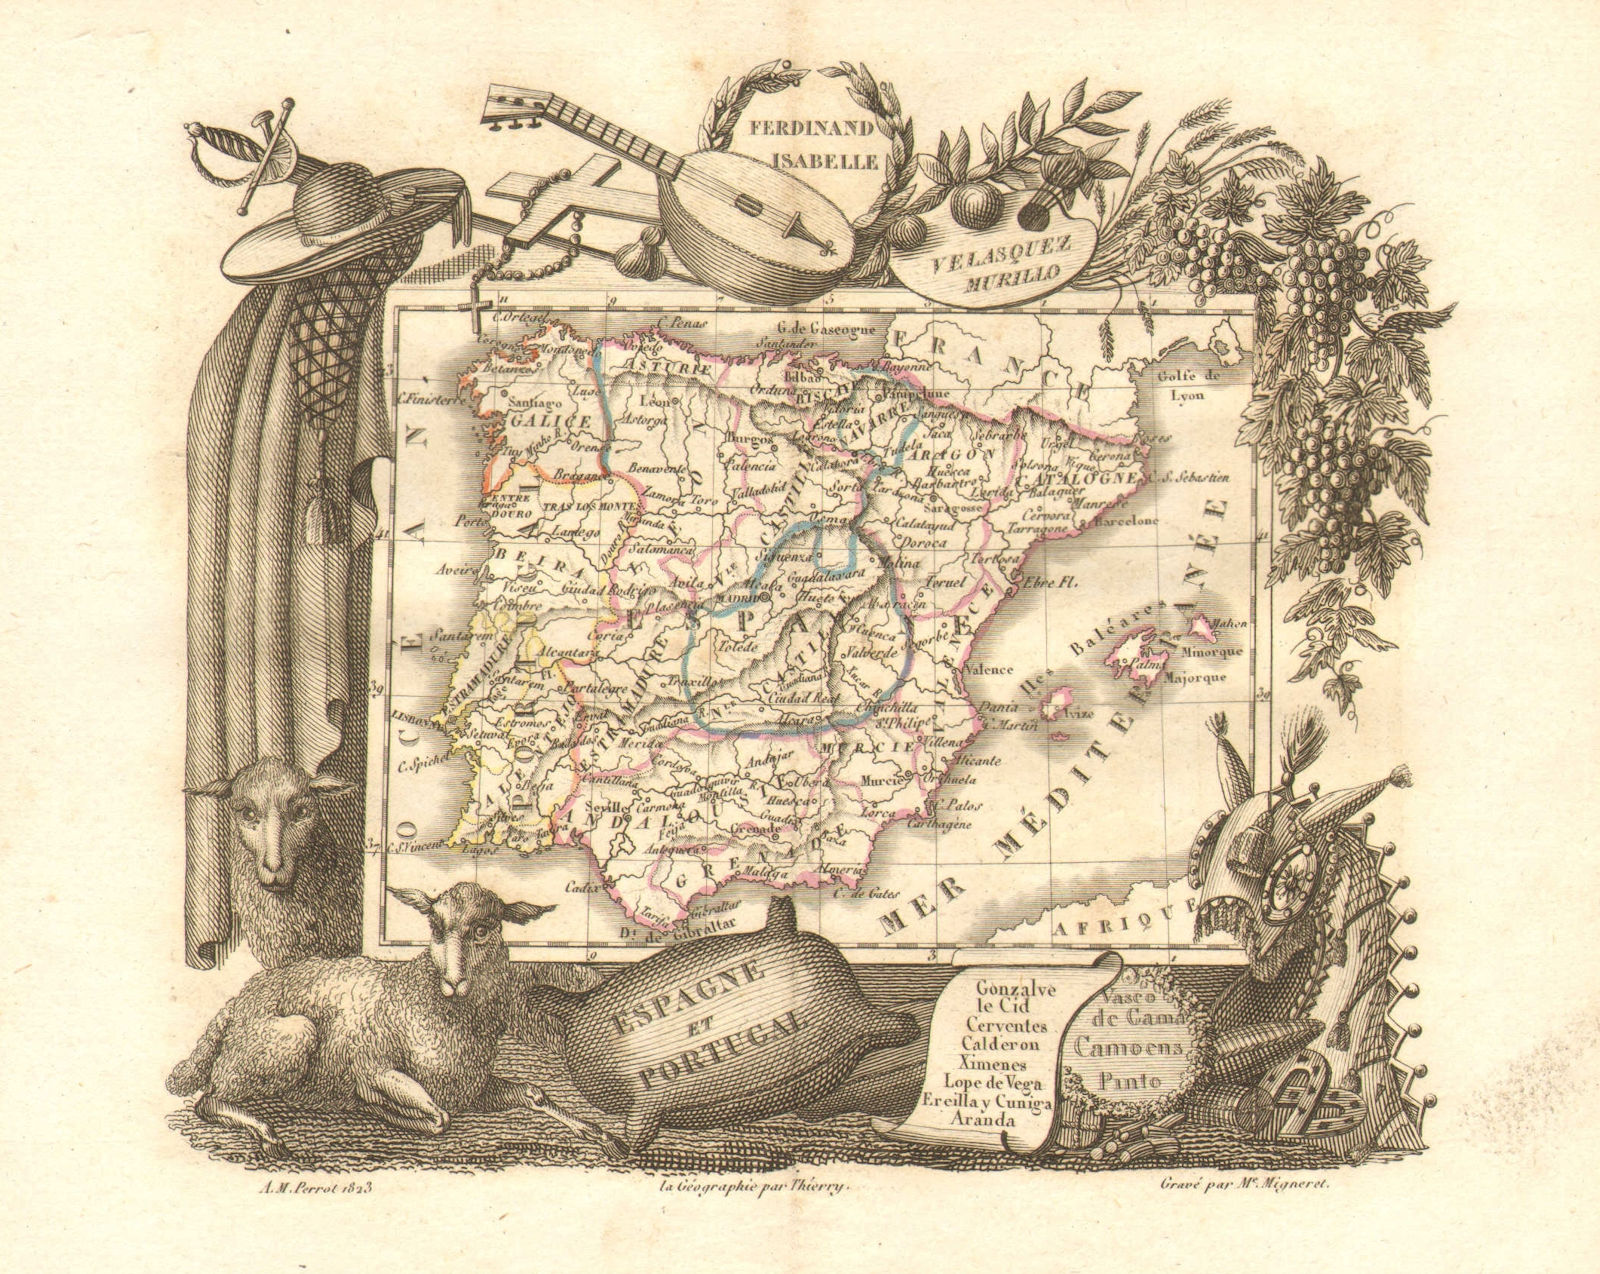 Associate Product 'Espagne et Portugal' by Aristide Michel Perrot. Iberia Spain 1823 old map